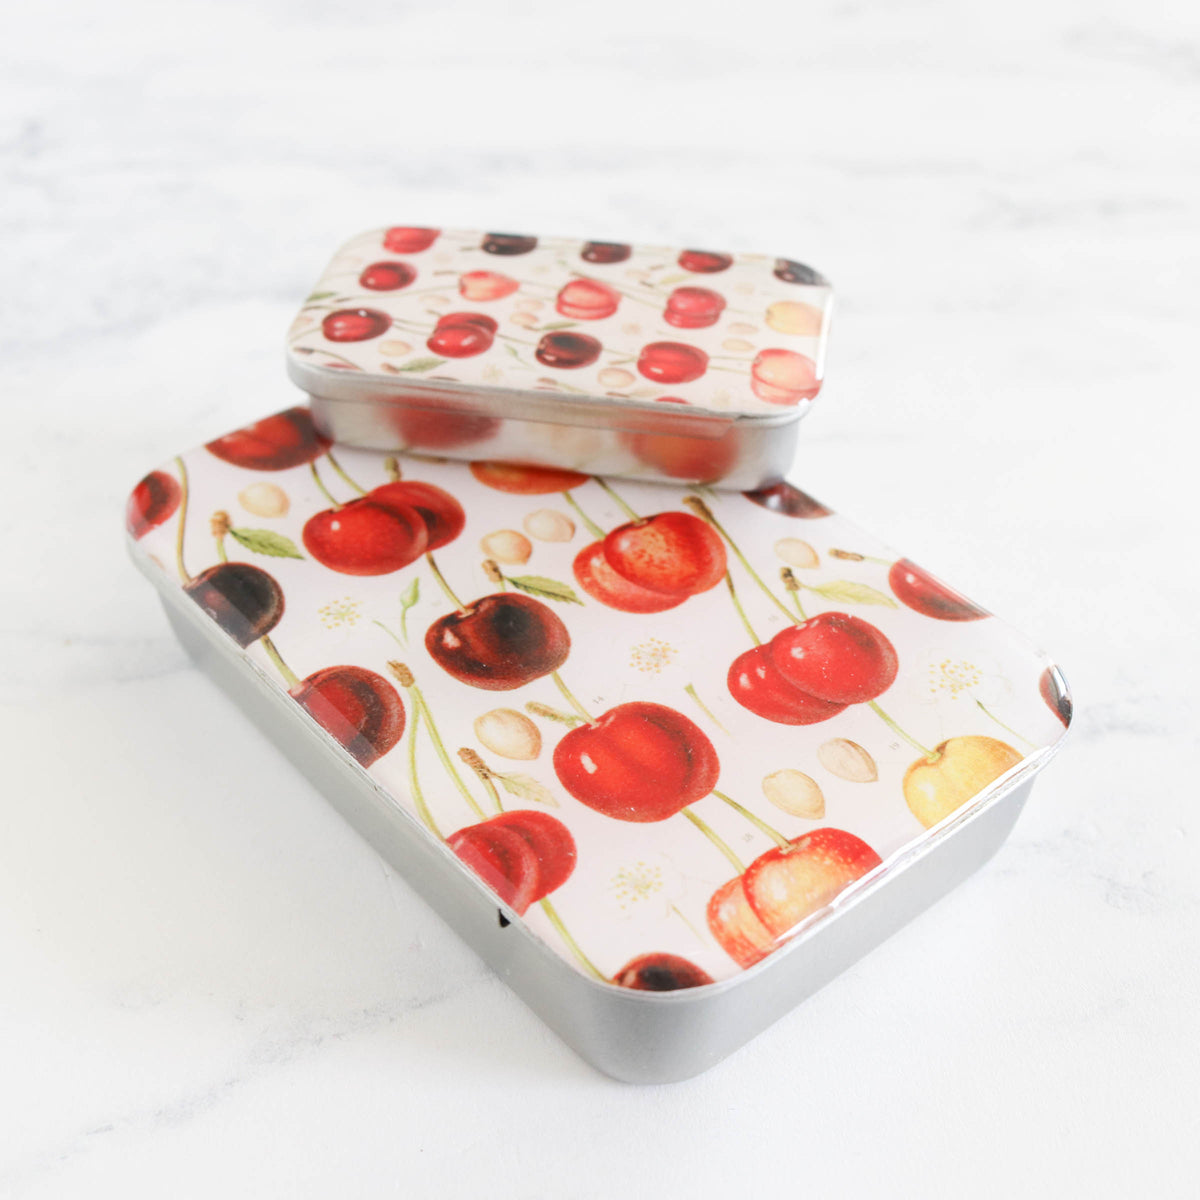 Vintage-Inspired Storage and Notions Tins - Cherry